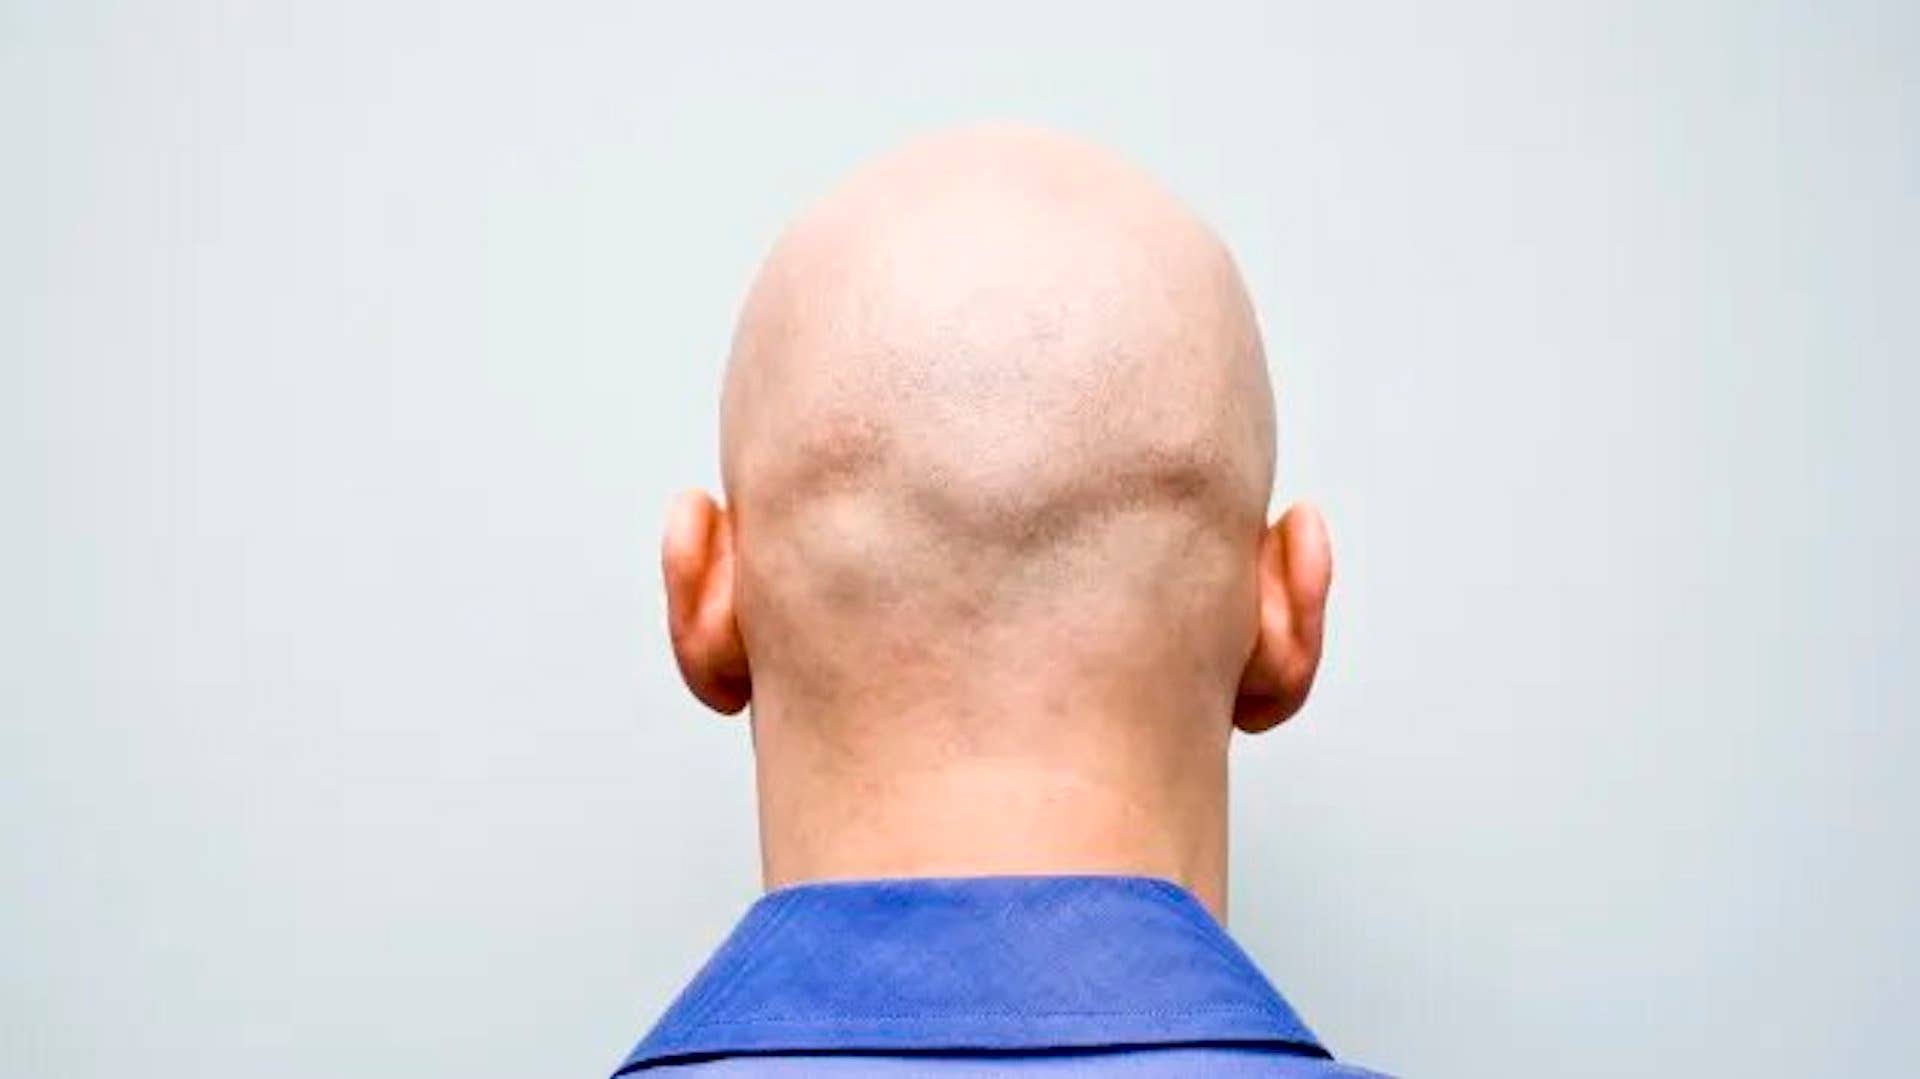 U.K. employment ruling determines calling a man "bald" is sexual harassment